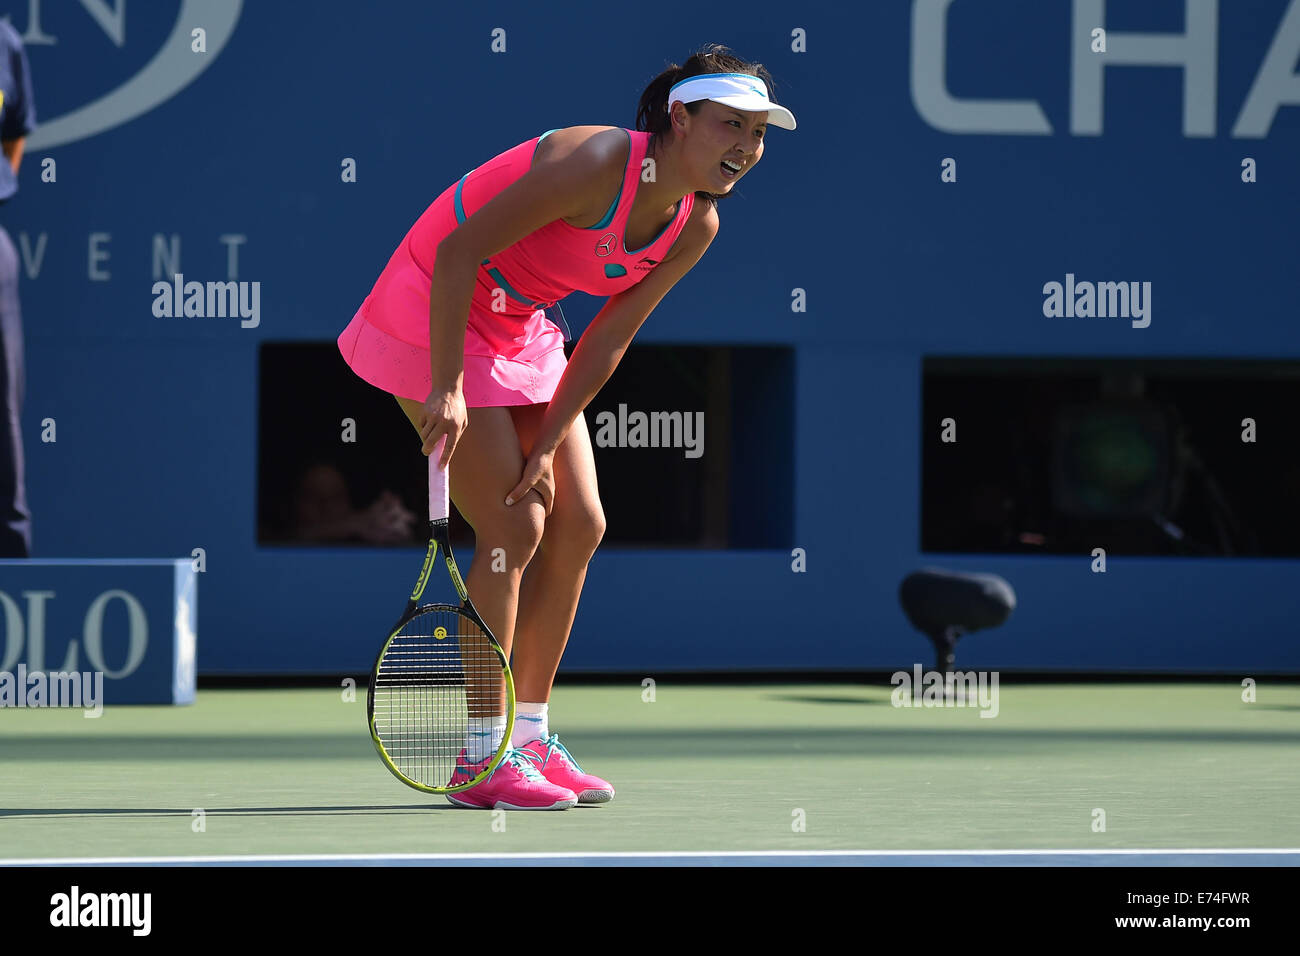 Flushing Meadows, New York, USA. 05th Sep, 2014. Shuai Peng (CHN) gets cramps at US Open 2014, pumps her fist as she plays Wozniacki in the 1st womens semi-final. Wozniacki won in 2 sets as Peng retired injured © Action Plus Sports/Alamy Live News Stock Photo